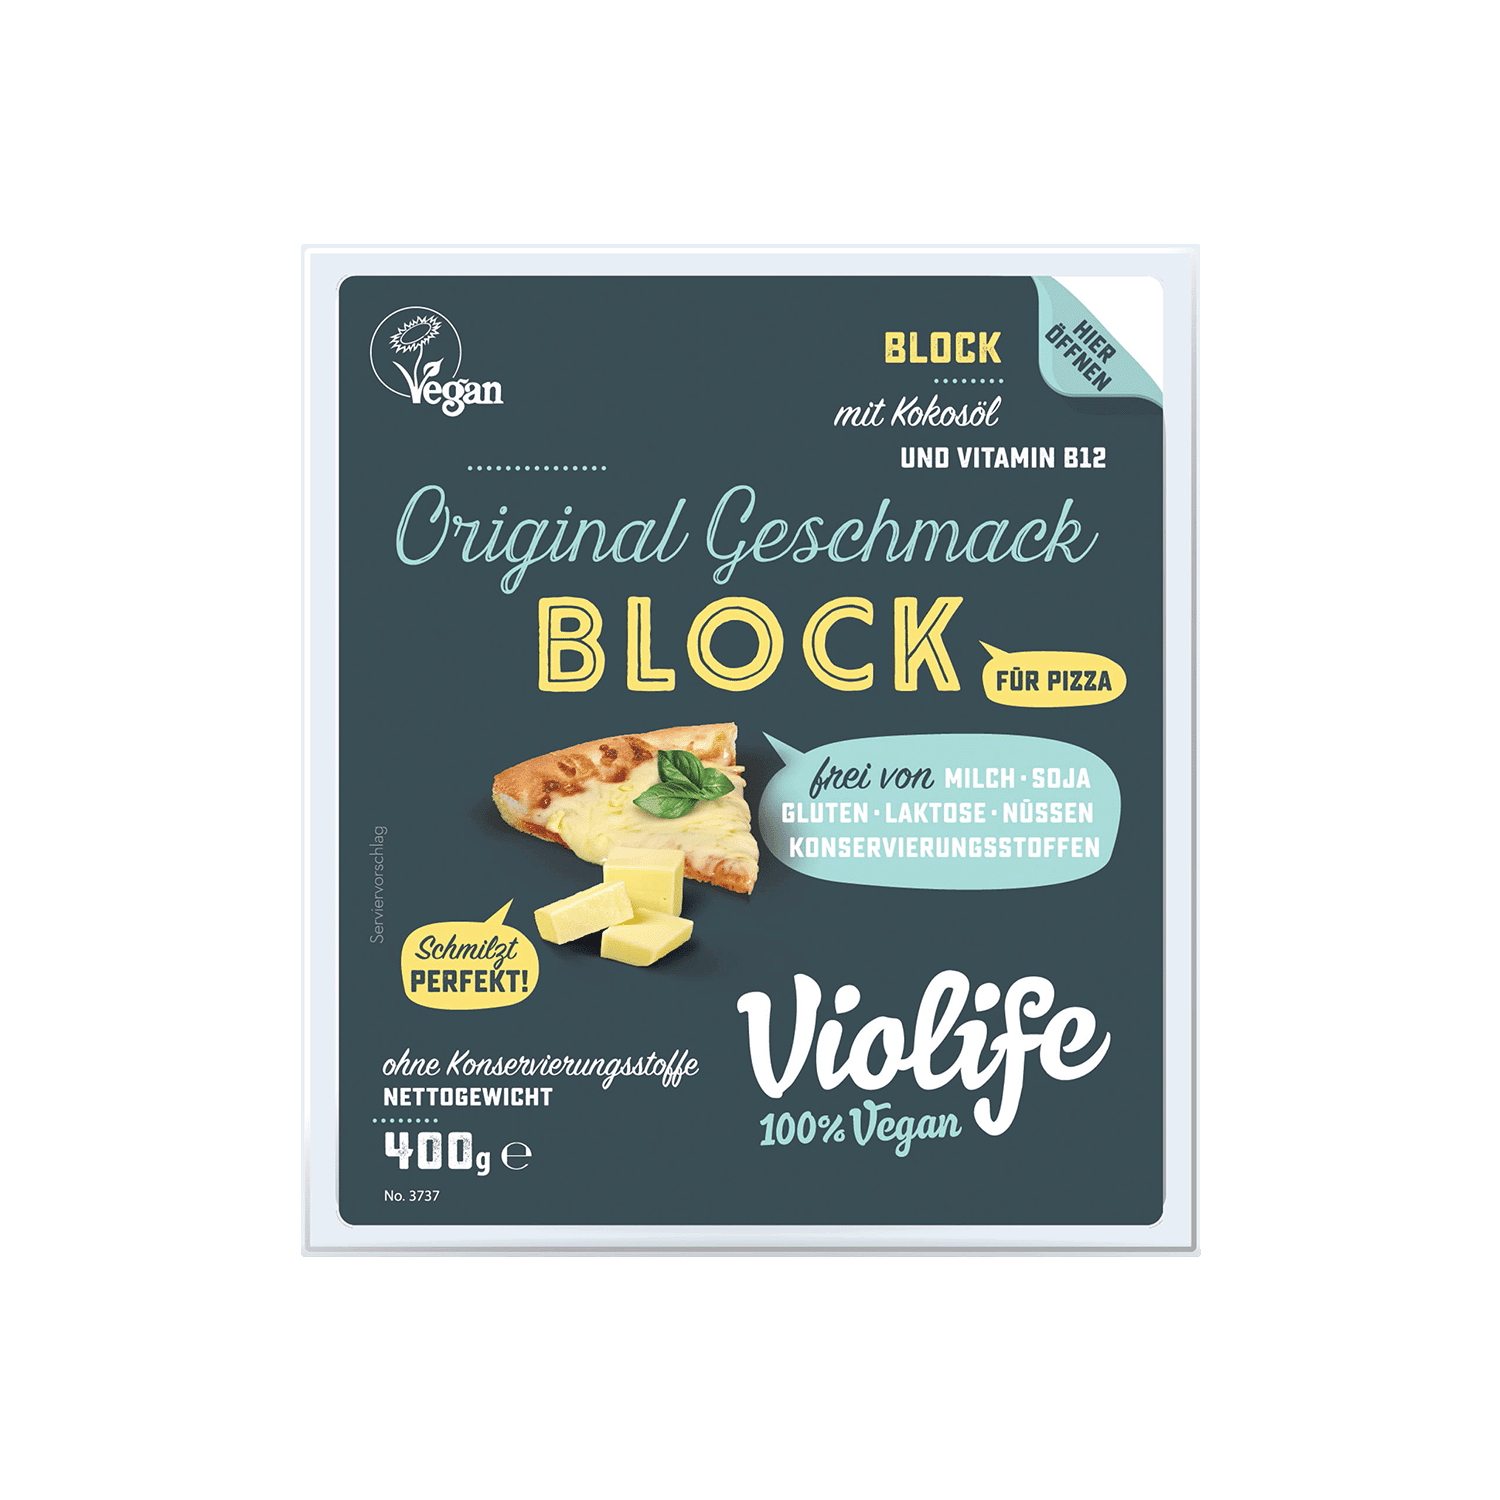 Block "For Pizza", 400g